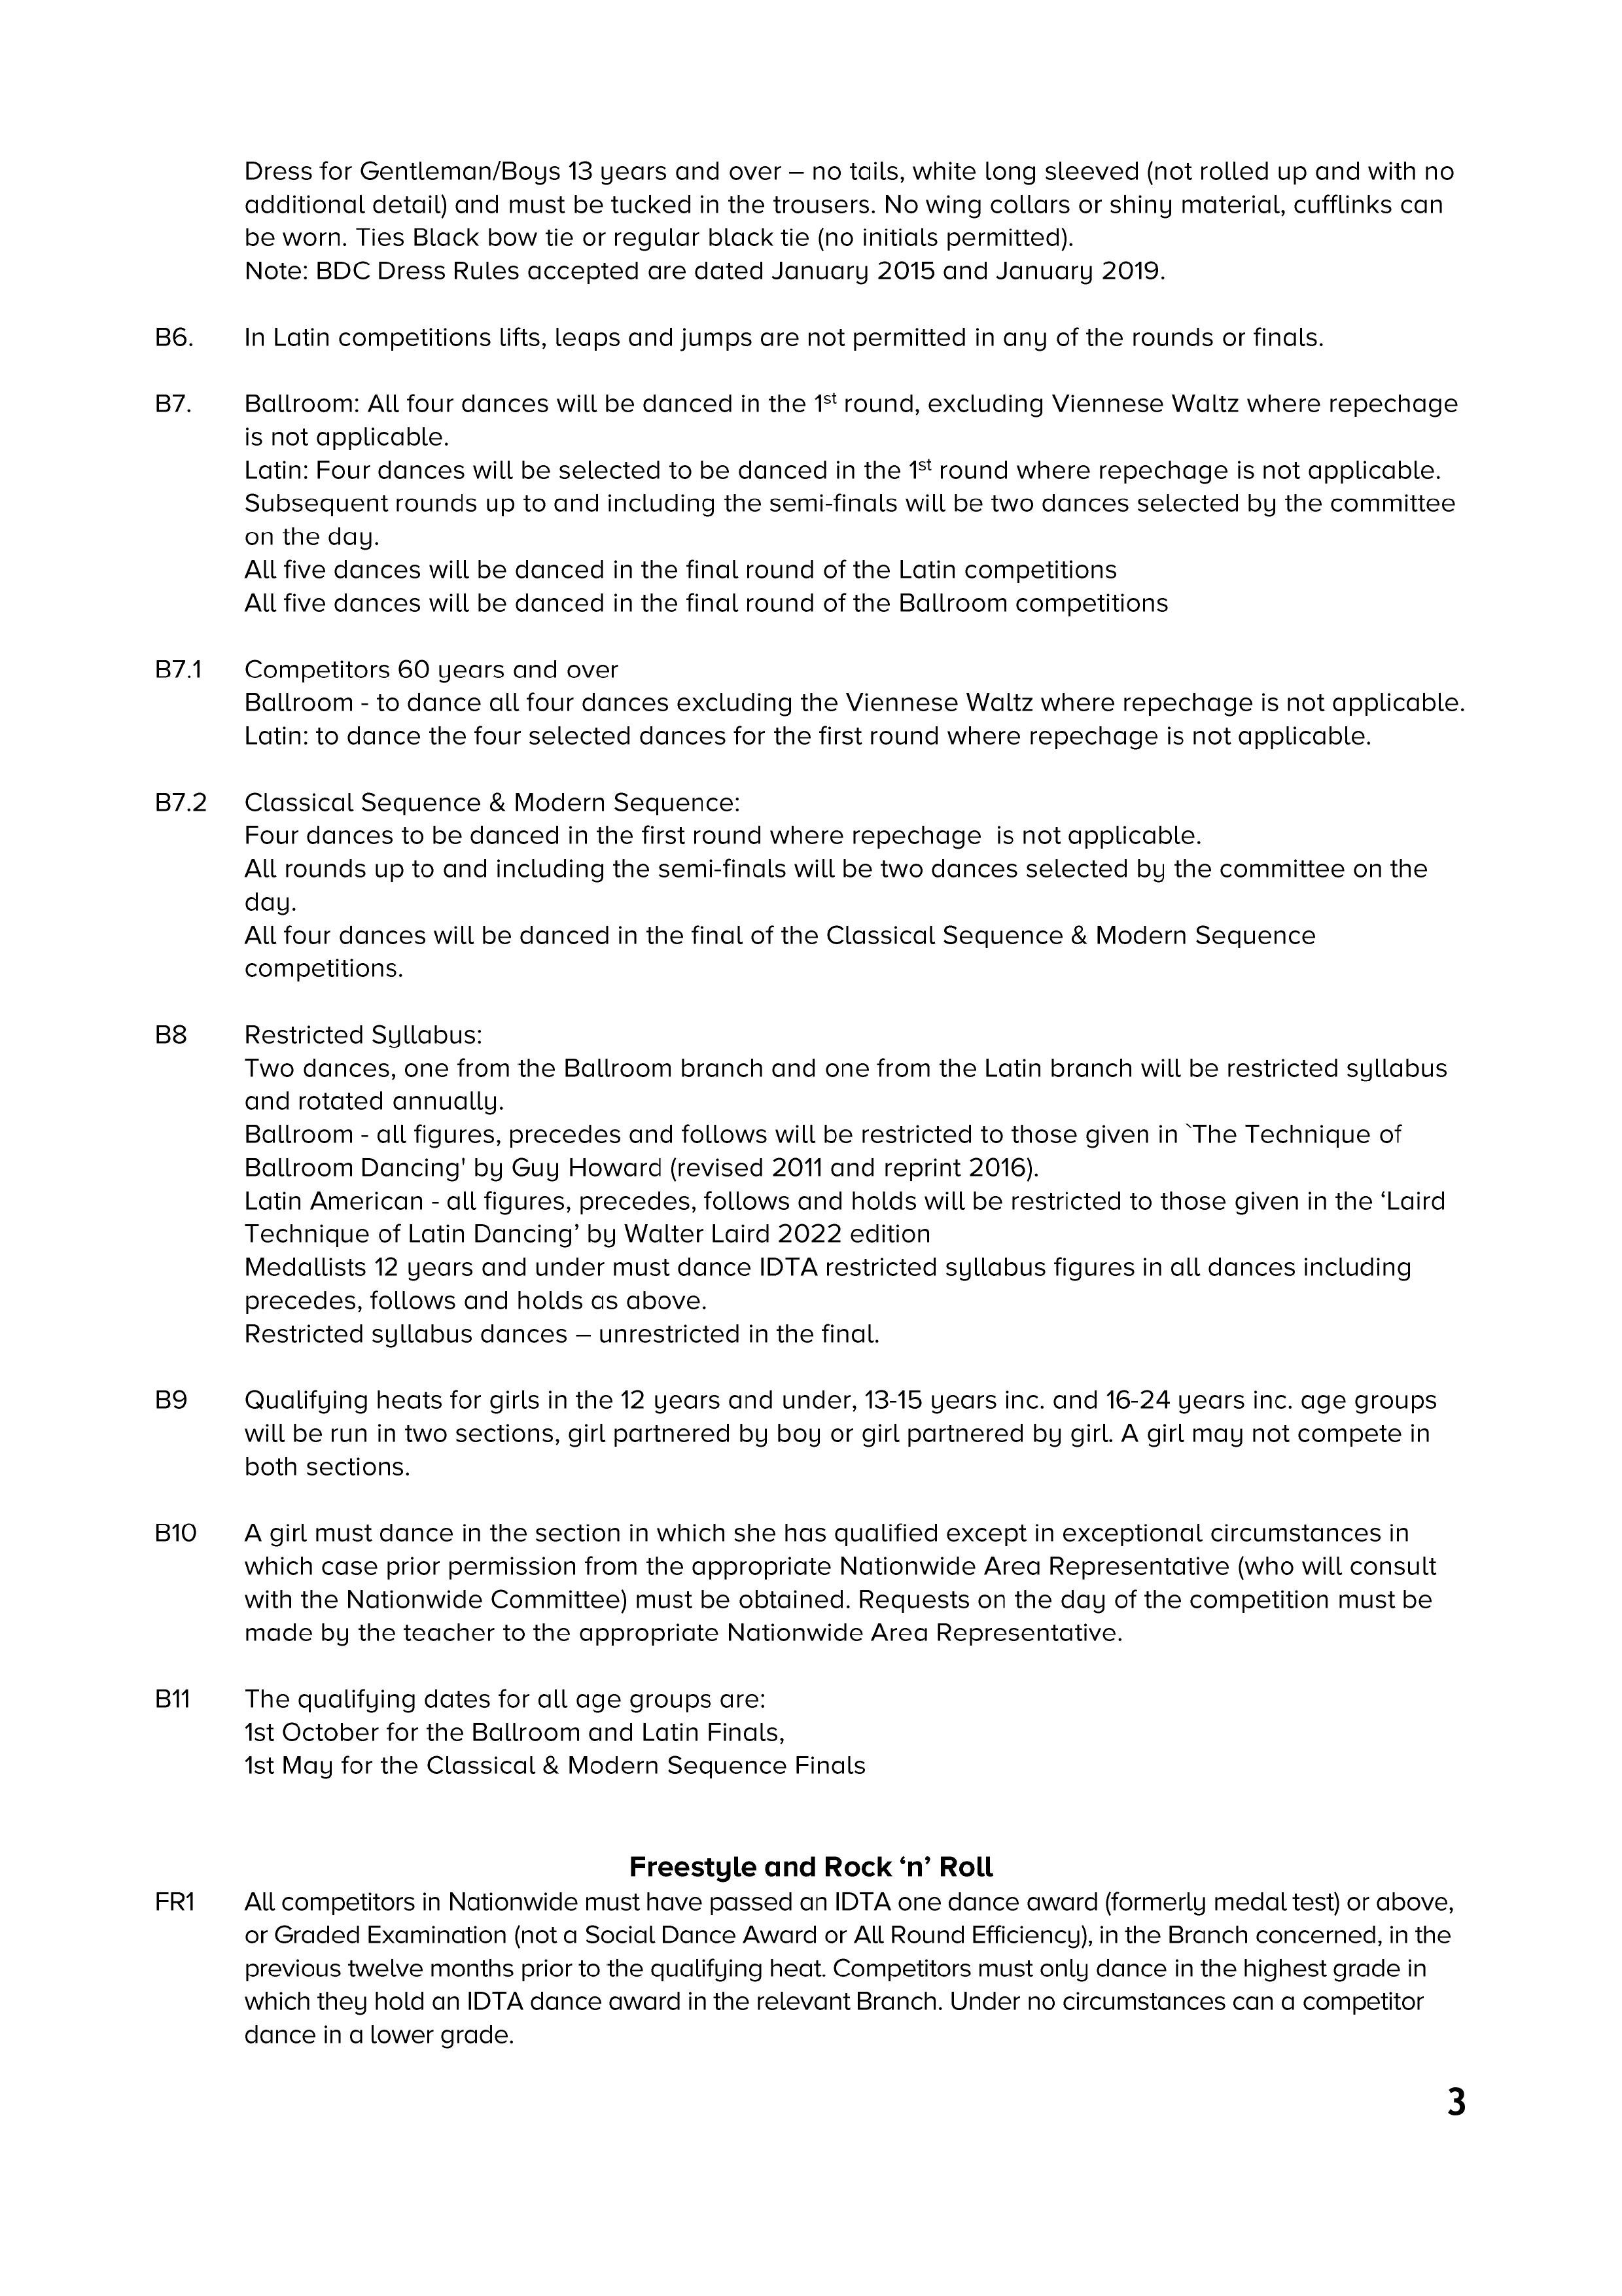 Nationwide-Rules-updated-2024-images-2.jpg